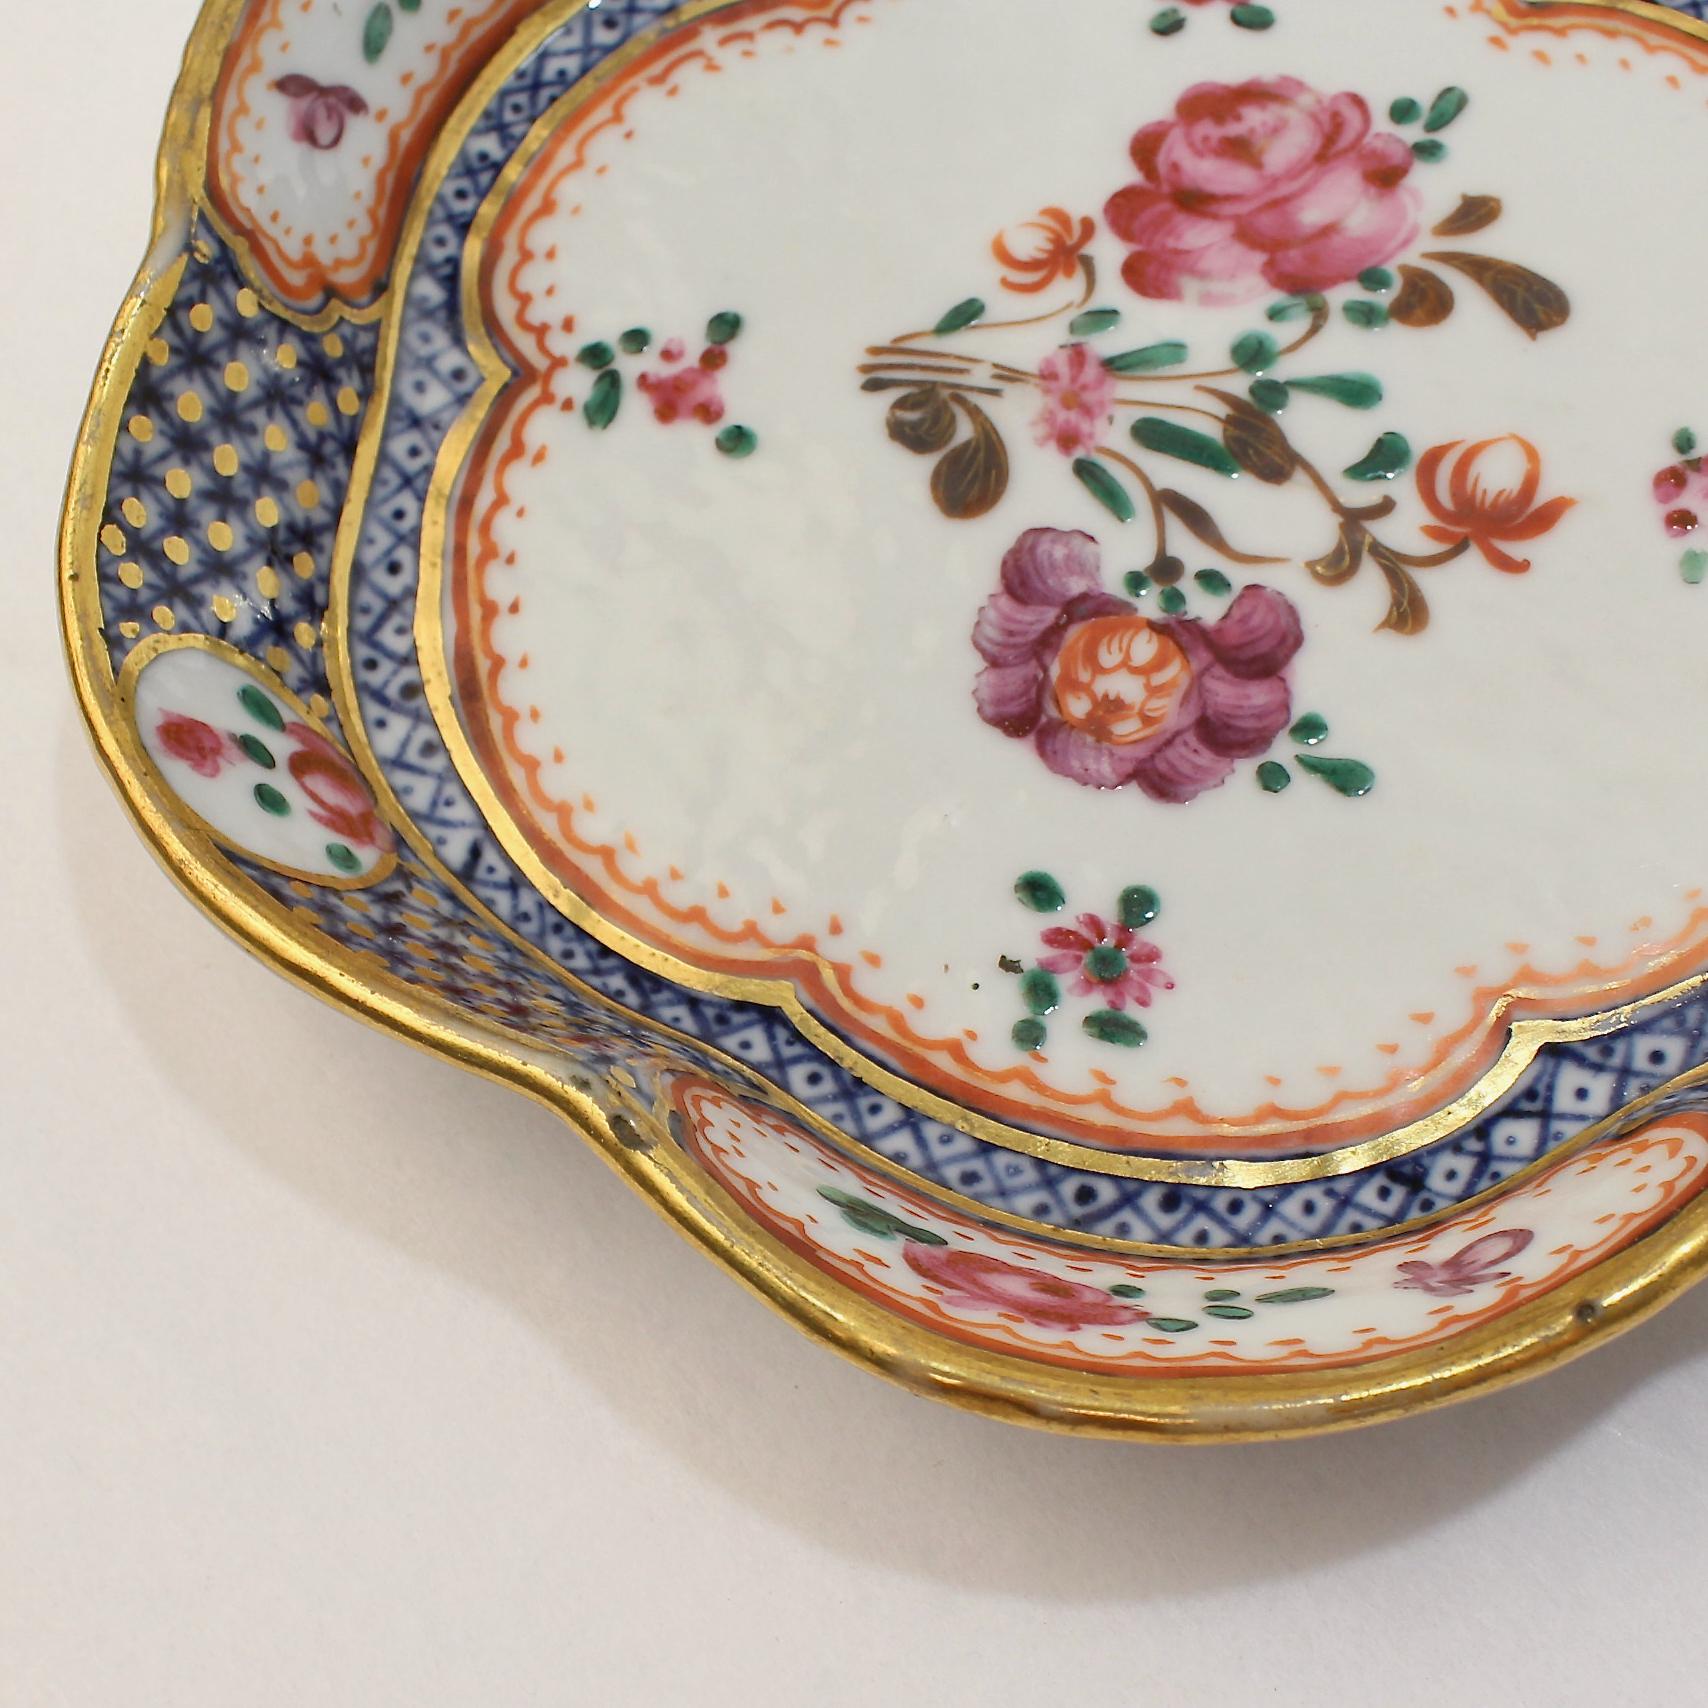 Antique Famille Rose Chinese Export Porcelain Bowl or Dish For Sale 3